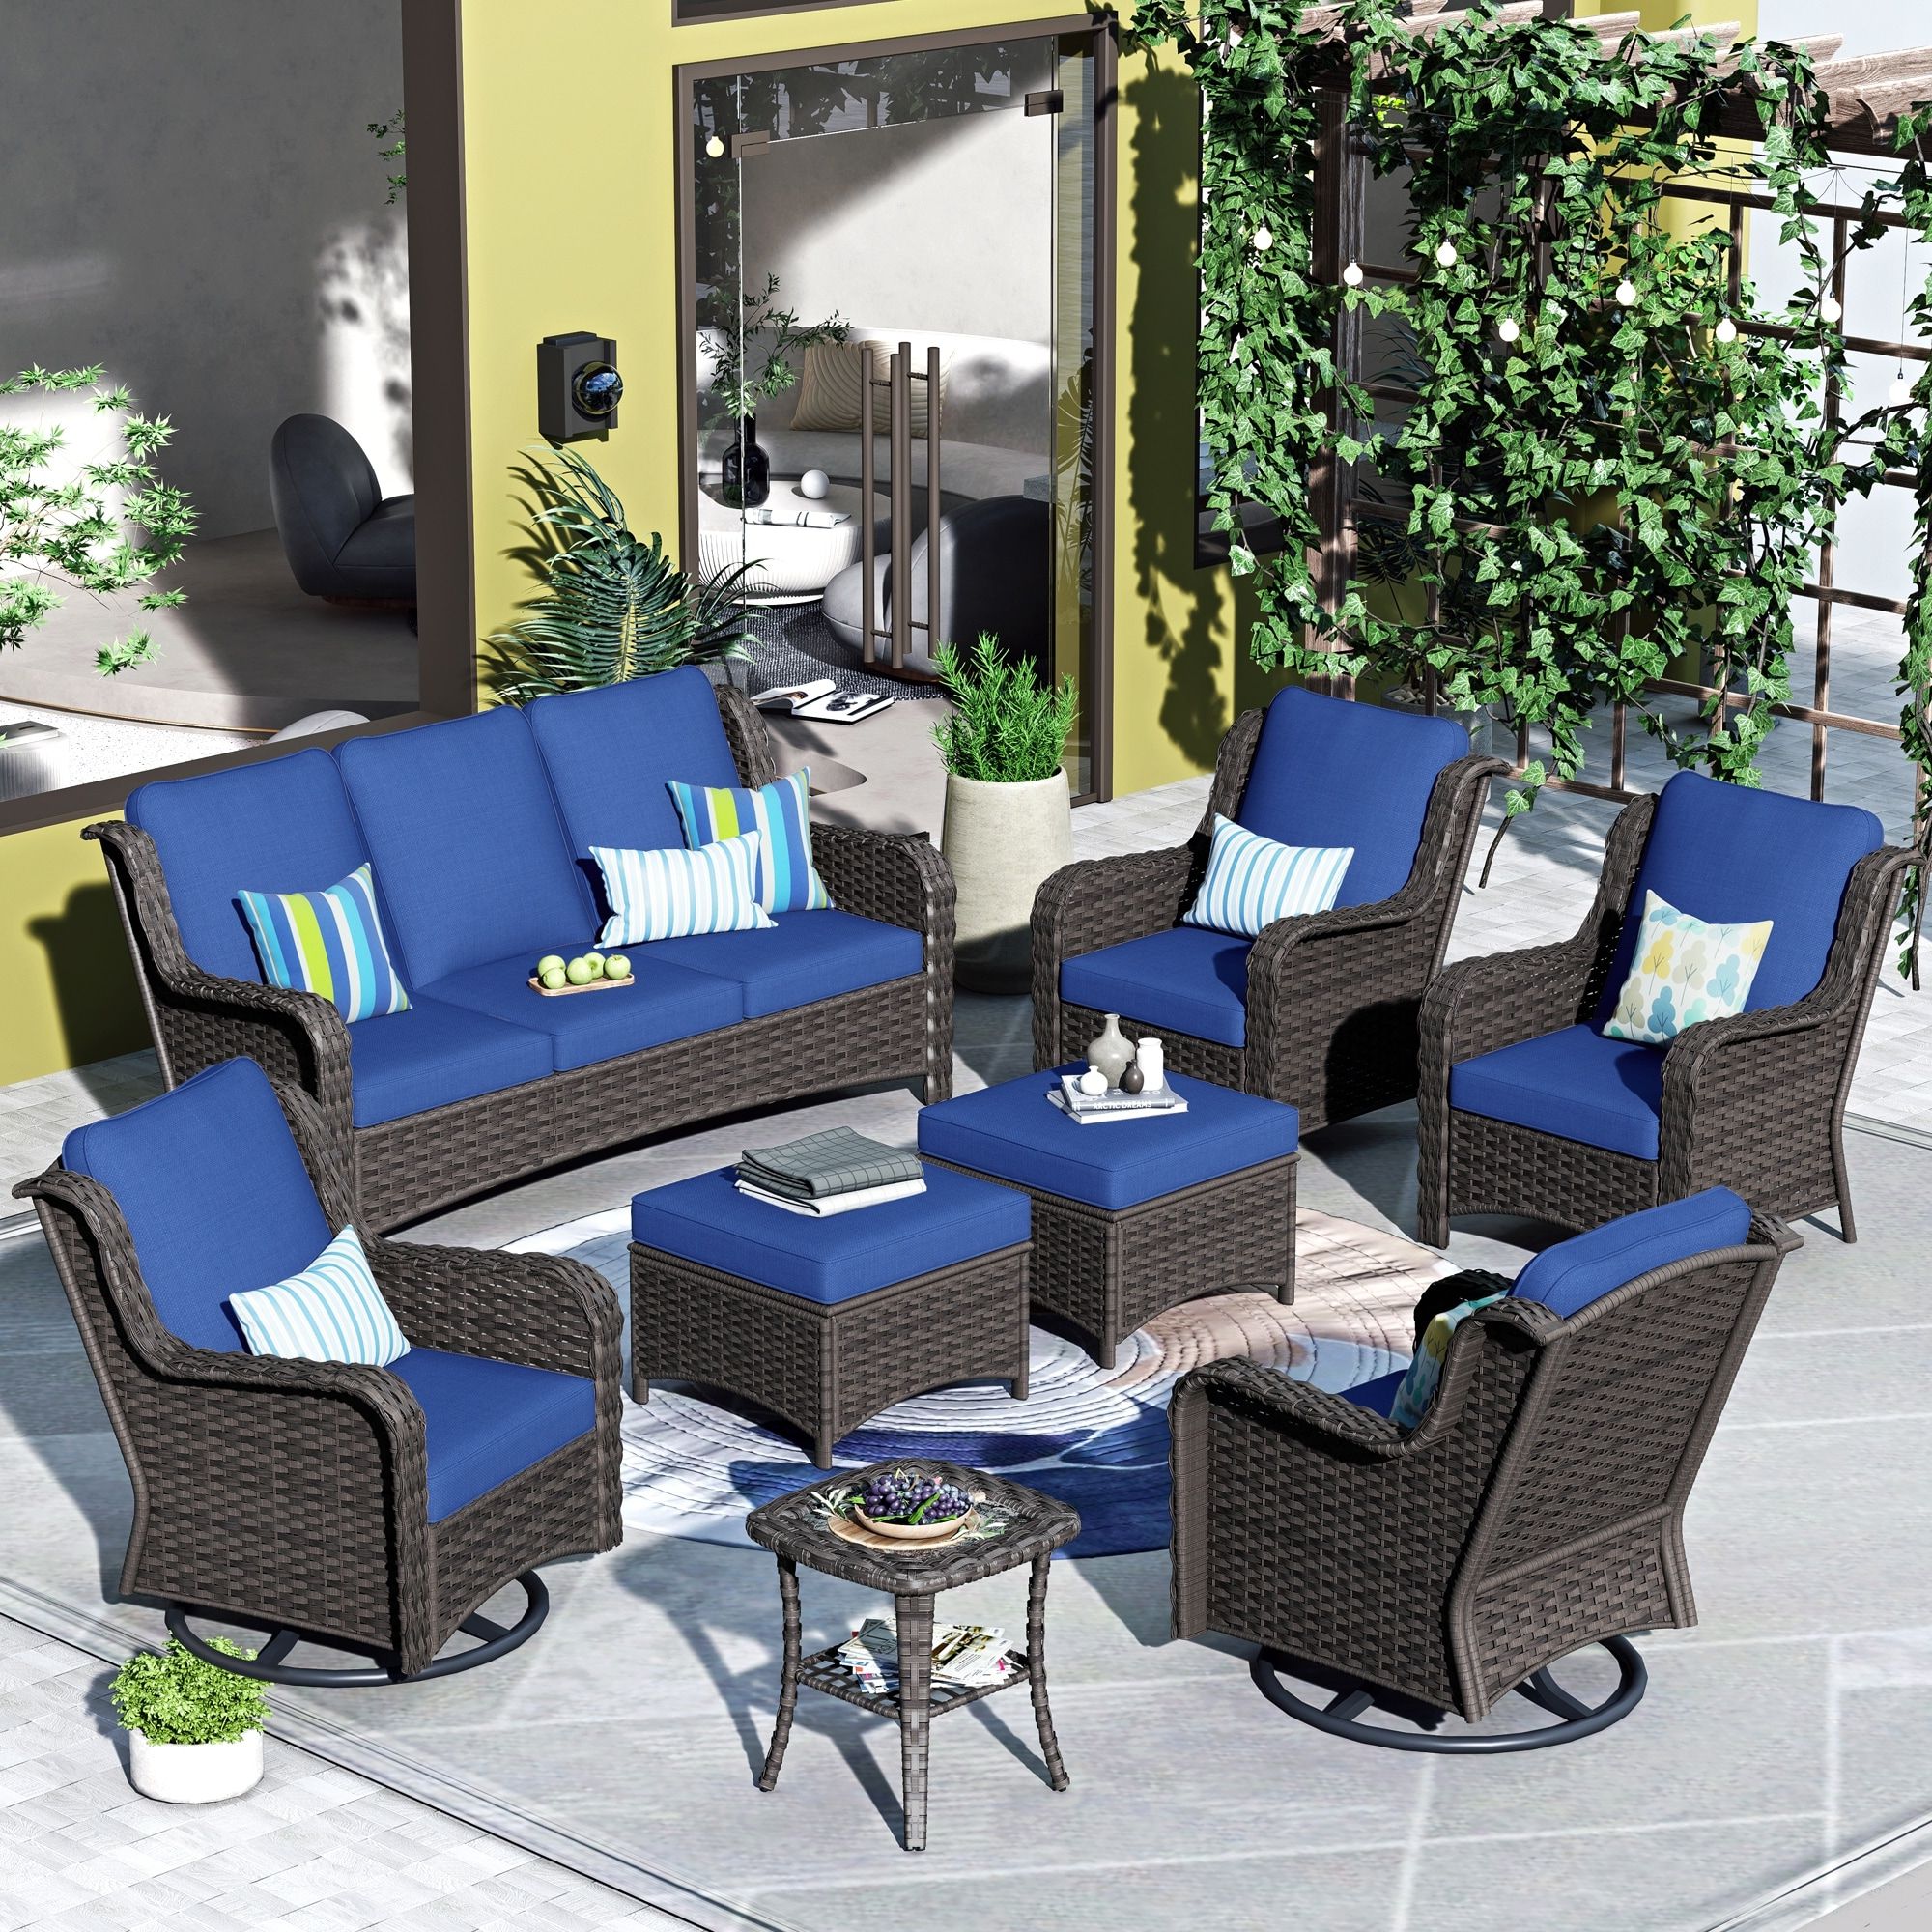 8 Pcs Outdoor Patio Furniture Set Pertaining To Newest Ovios 8 Piece Rattan Wicker Patio Furniture Set Swivel Rocking Chair Set –  On Sale – –  (View 8 of 15)